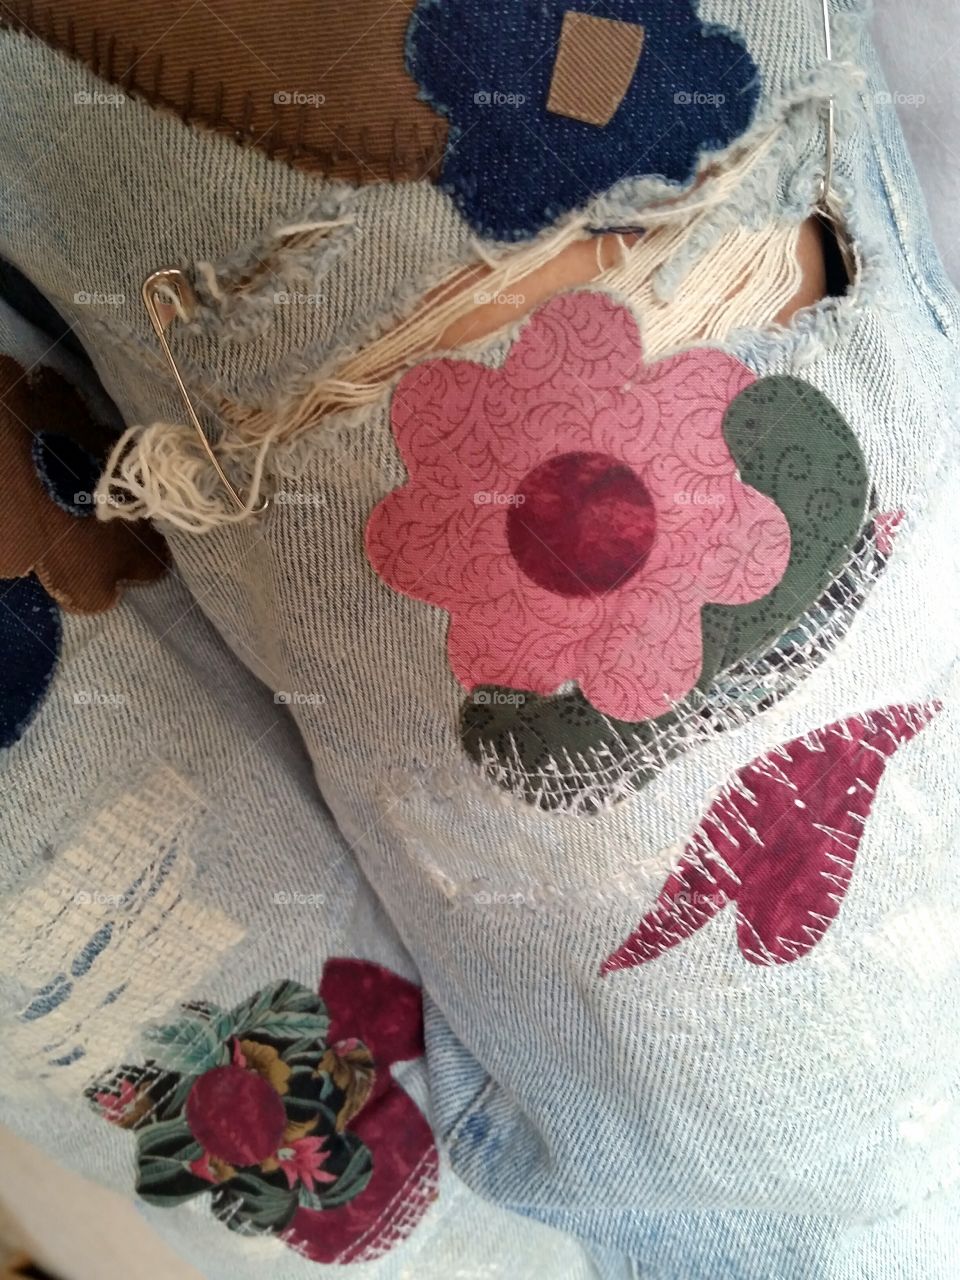 ripped jeans with patch design and safety pins